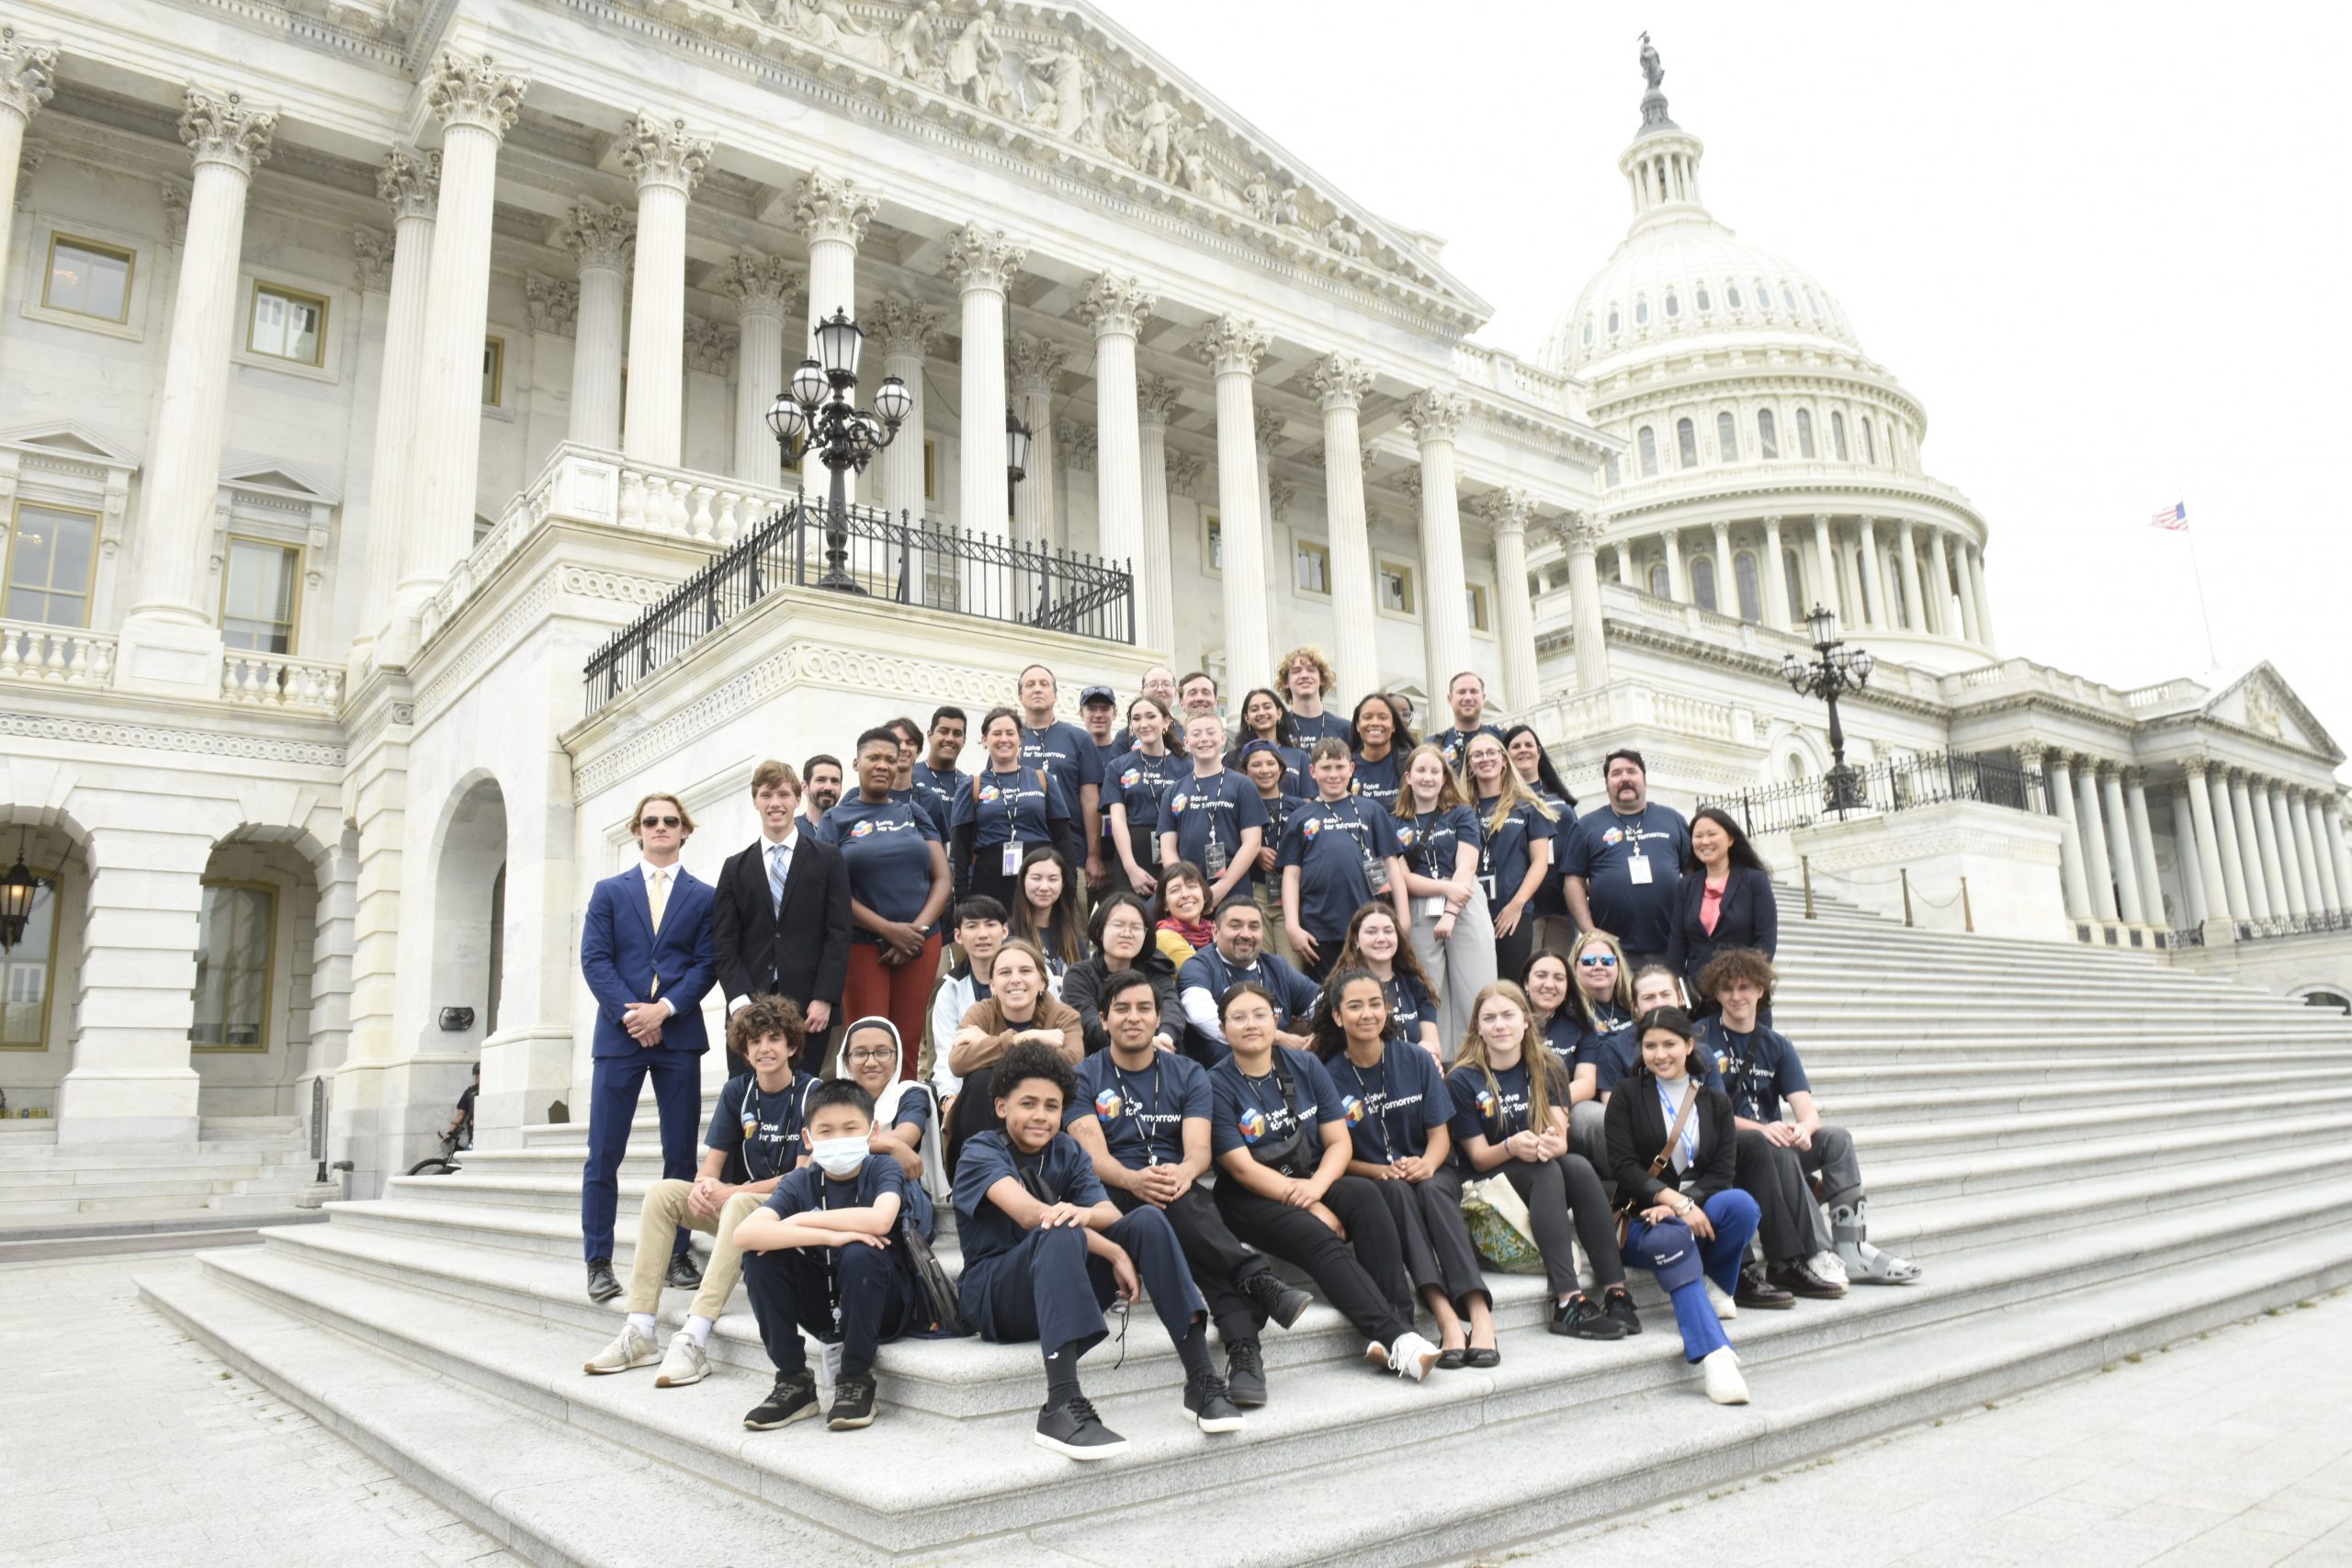 samsung-solve-for-tomorrow-students-us-capitol-steps